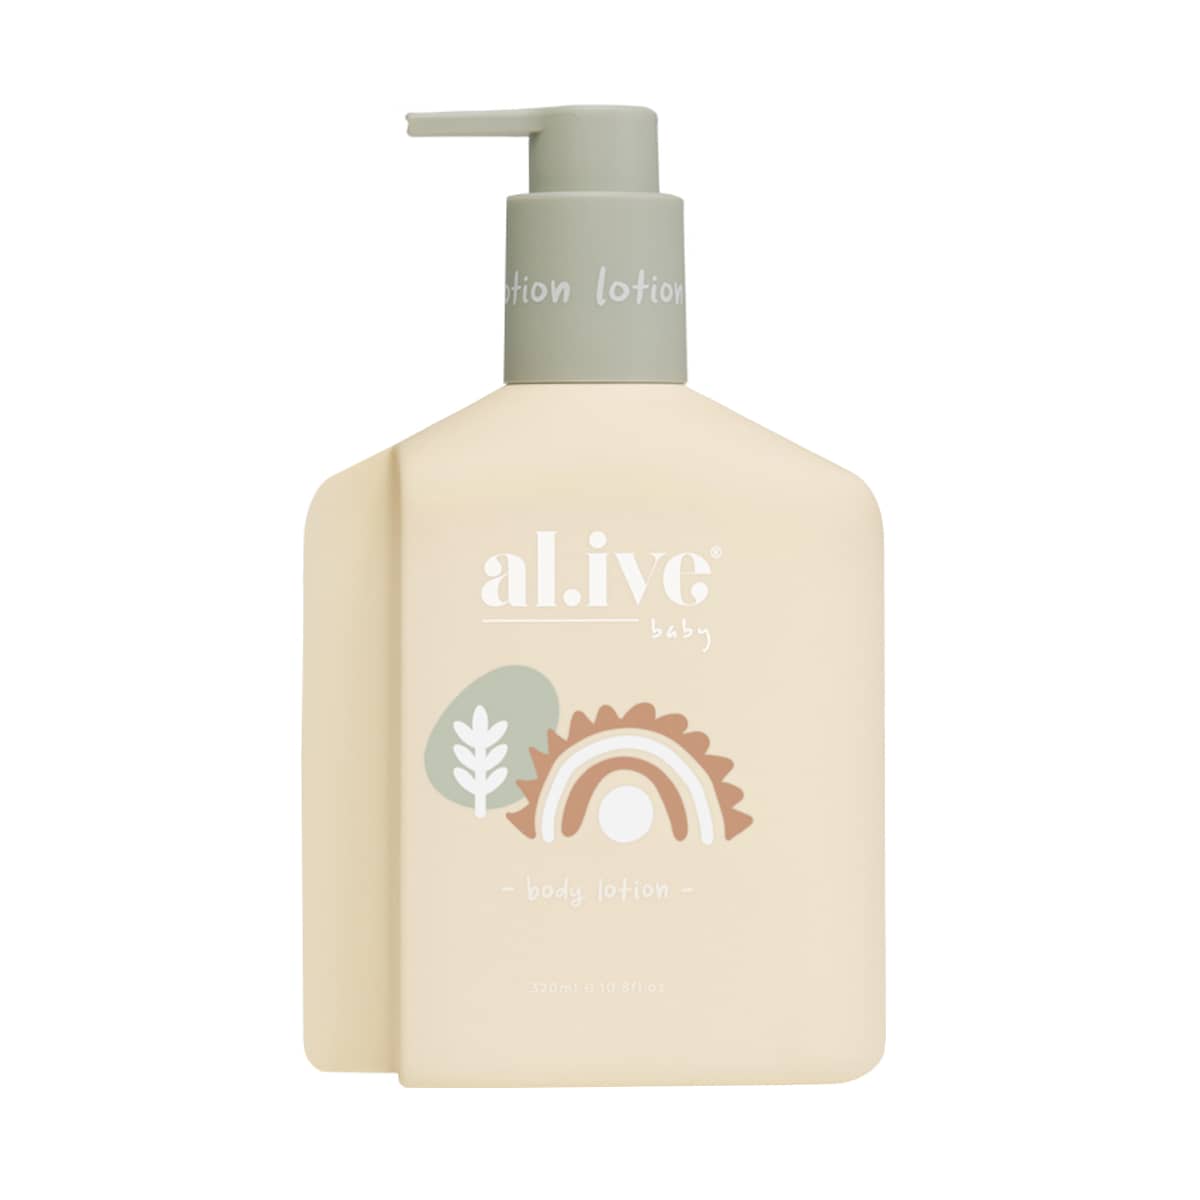 al.ive body Baby Body Lotion - Gentle Pear - New Design